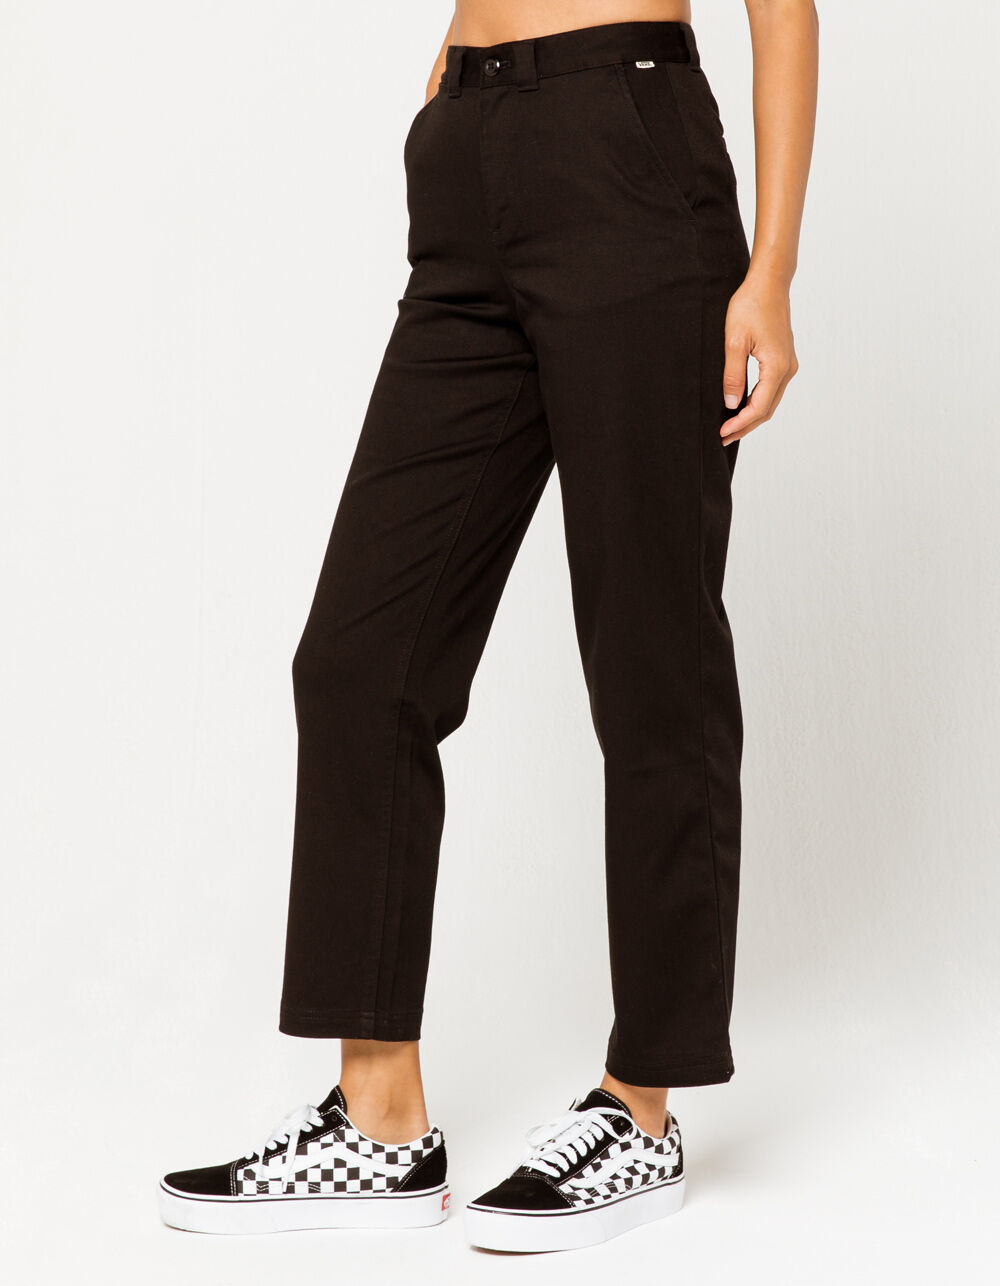 VANS Authentic Womens Chino Pants - BLACK | Tillys